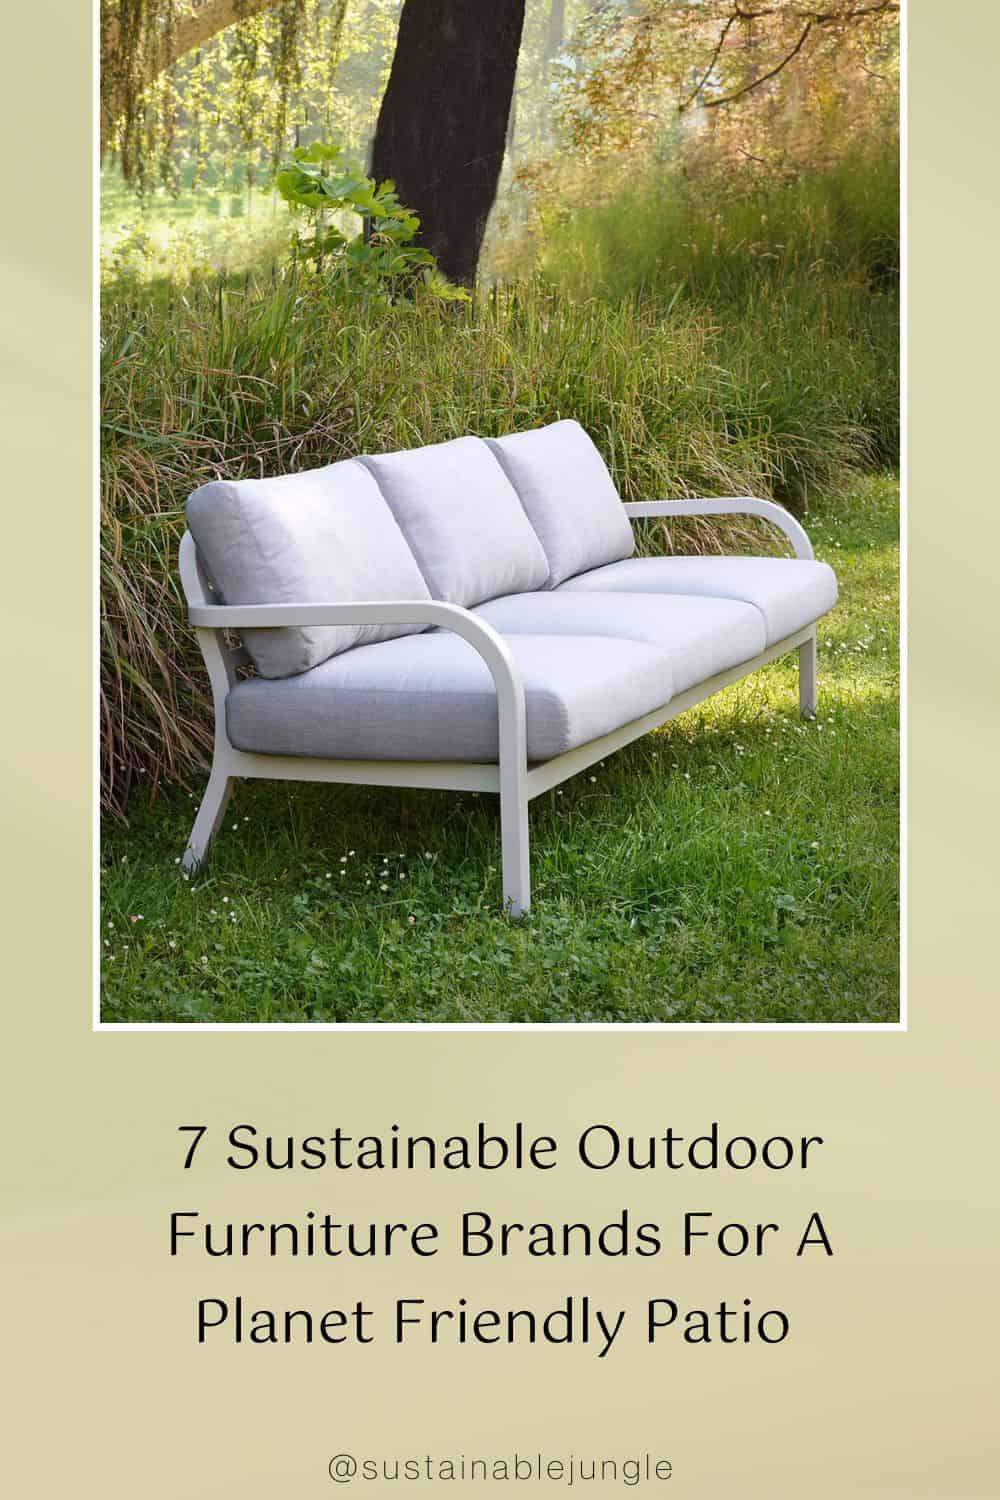 7 Sustainable Outdoor Furniture Brands For A Planet Friendly Patio Image by Emeco #sustainableoutdoorfurniture #sustainablepatiofurniture #sustainablepatiofurniture #ecofriendlyoutdoorfurntiure #outdoorfurnituresustainable #sustainablejungle